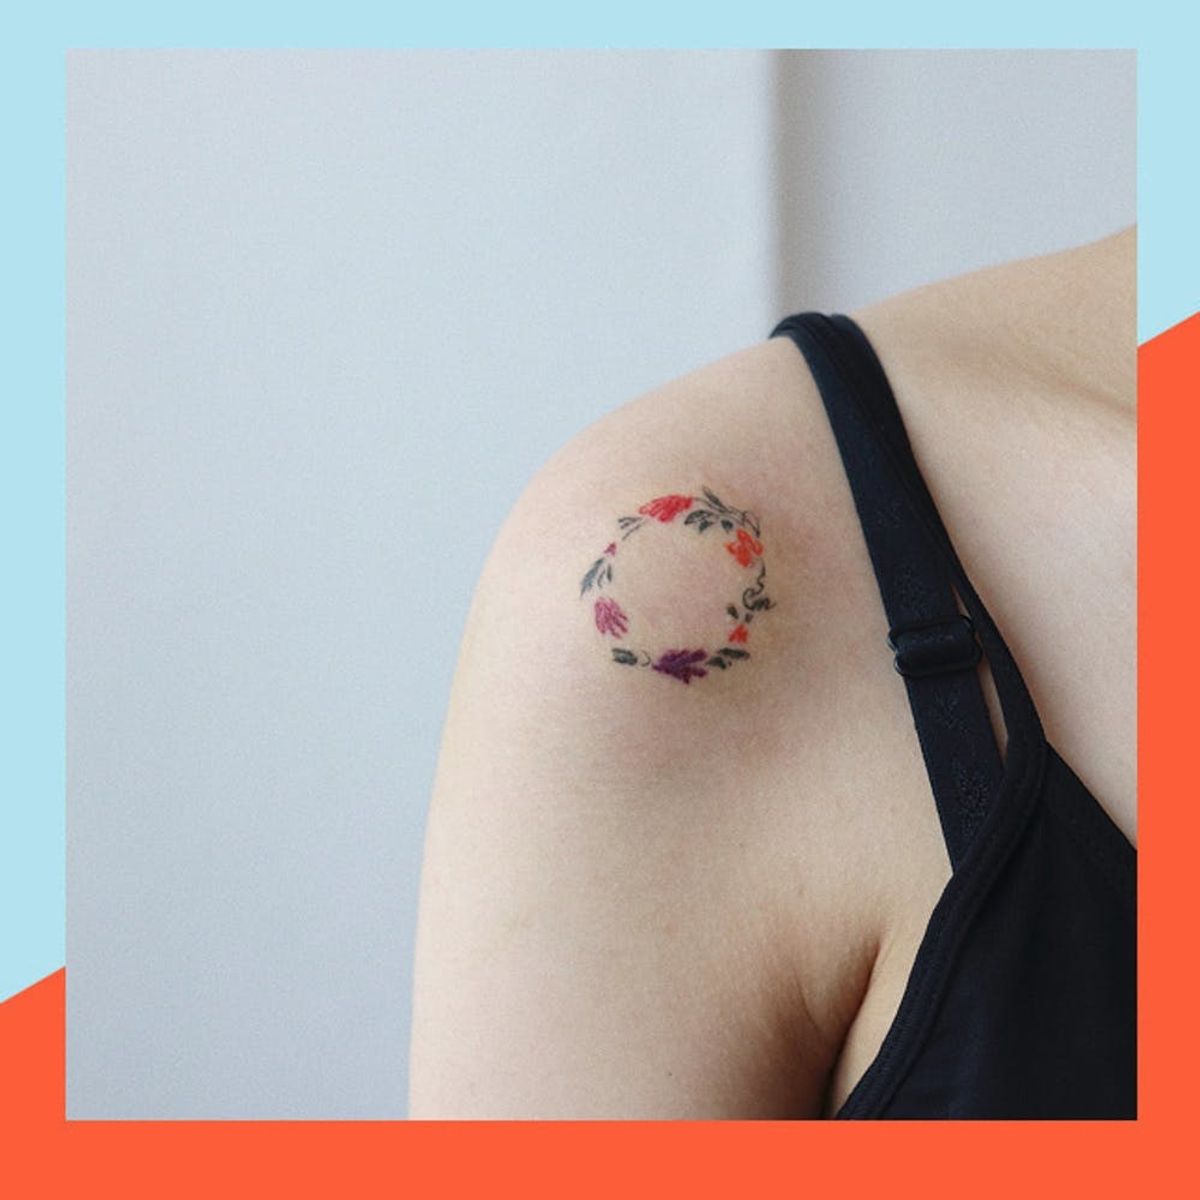 10 Spring-Inspired Tattoo Ideas You’ll Love